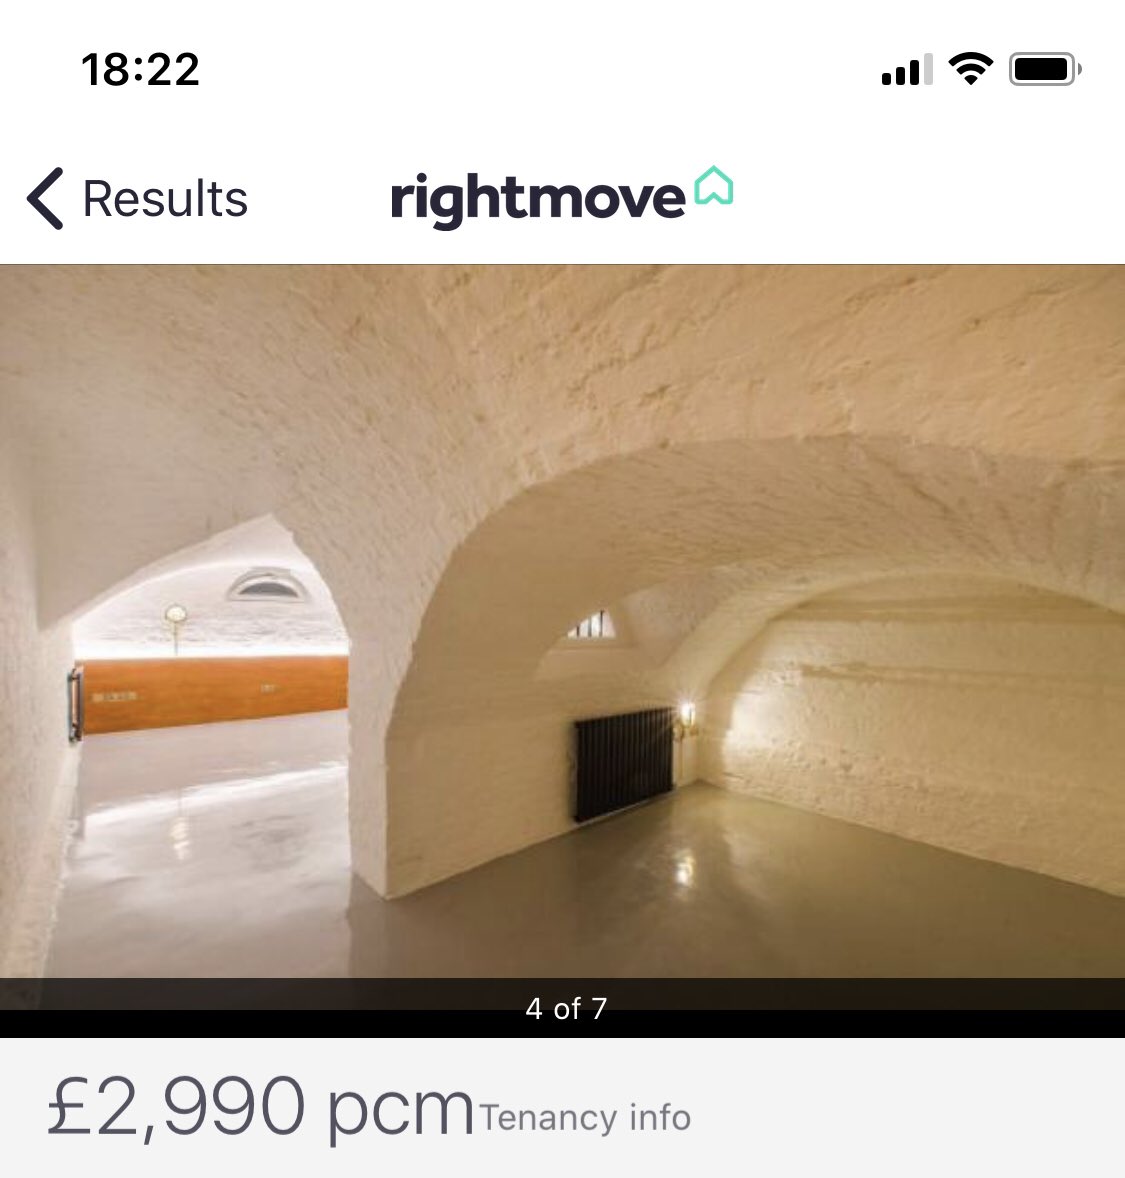 Ok, the London rental fun continues.  How about LIVING IN AN ACTUAL F-ING DUNGEON CITY CAVE no windows and all for 3k? At least the floor is polished & there are no carpets. How is this real life even?